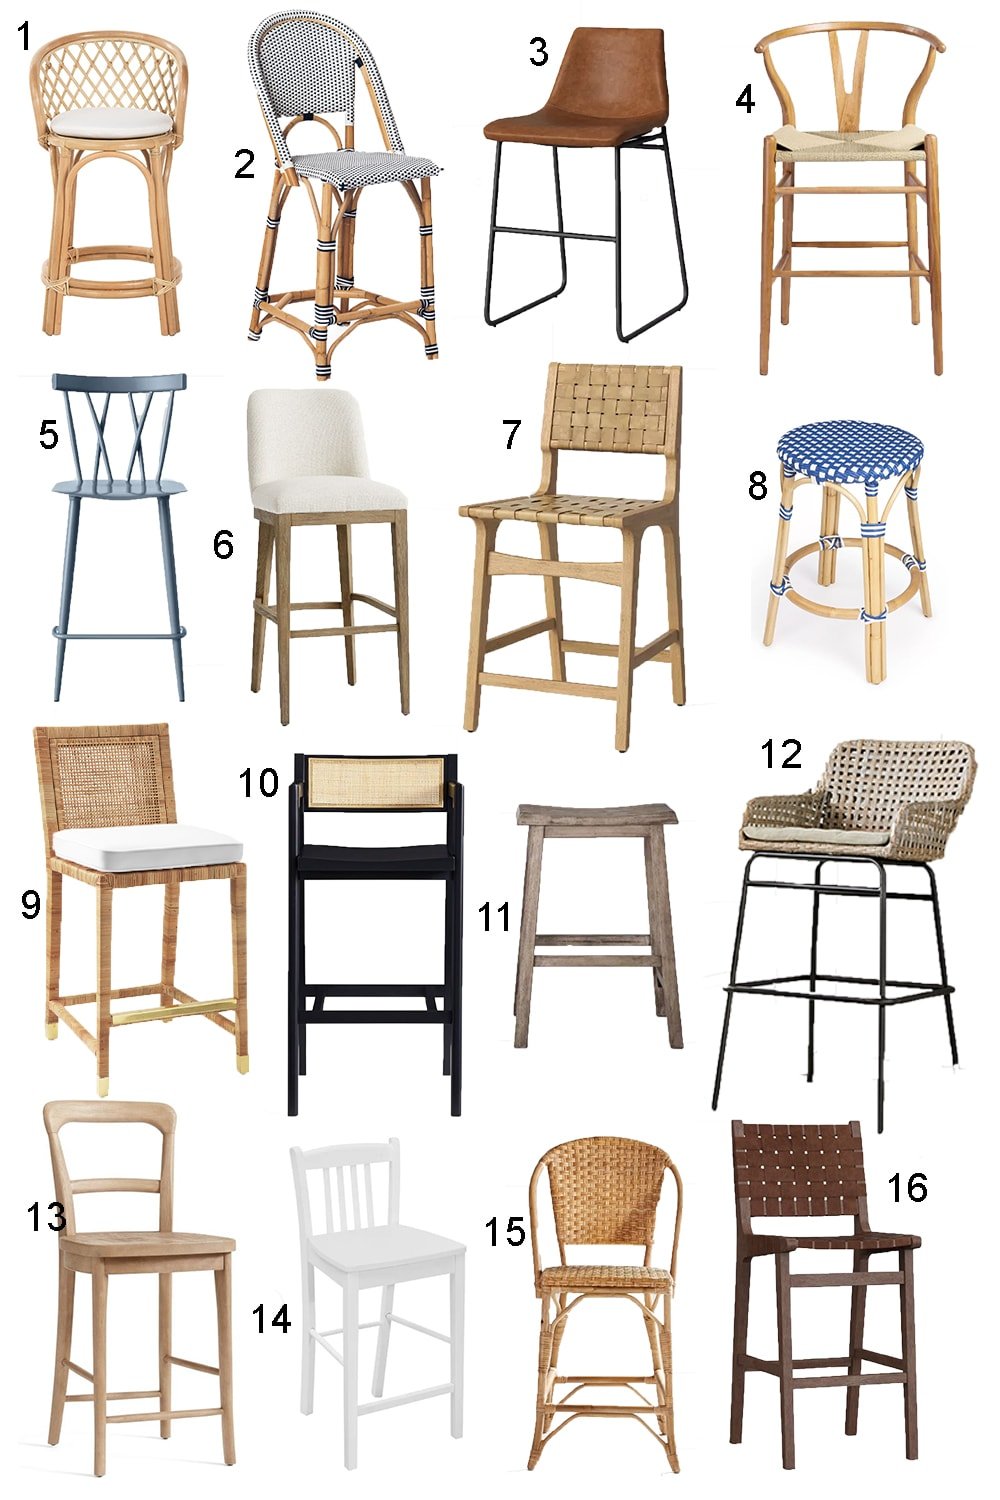 collage of 16 kitchen counter stools and chairs